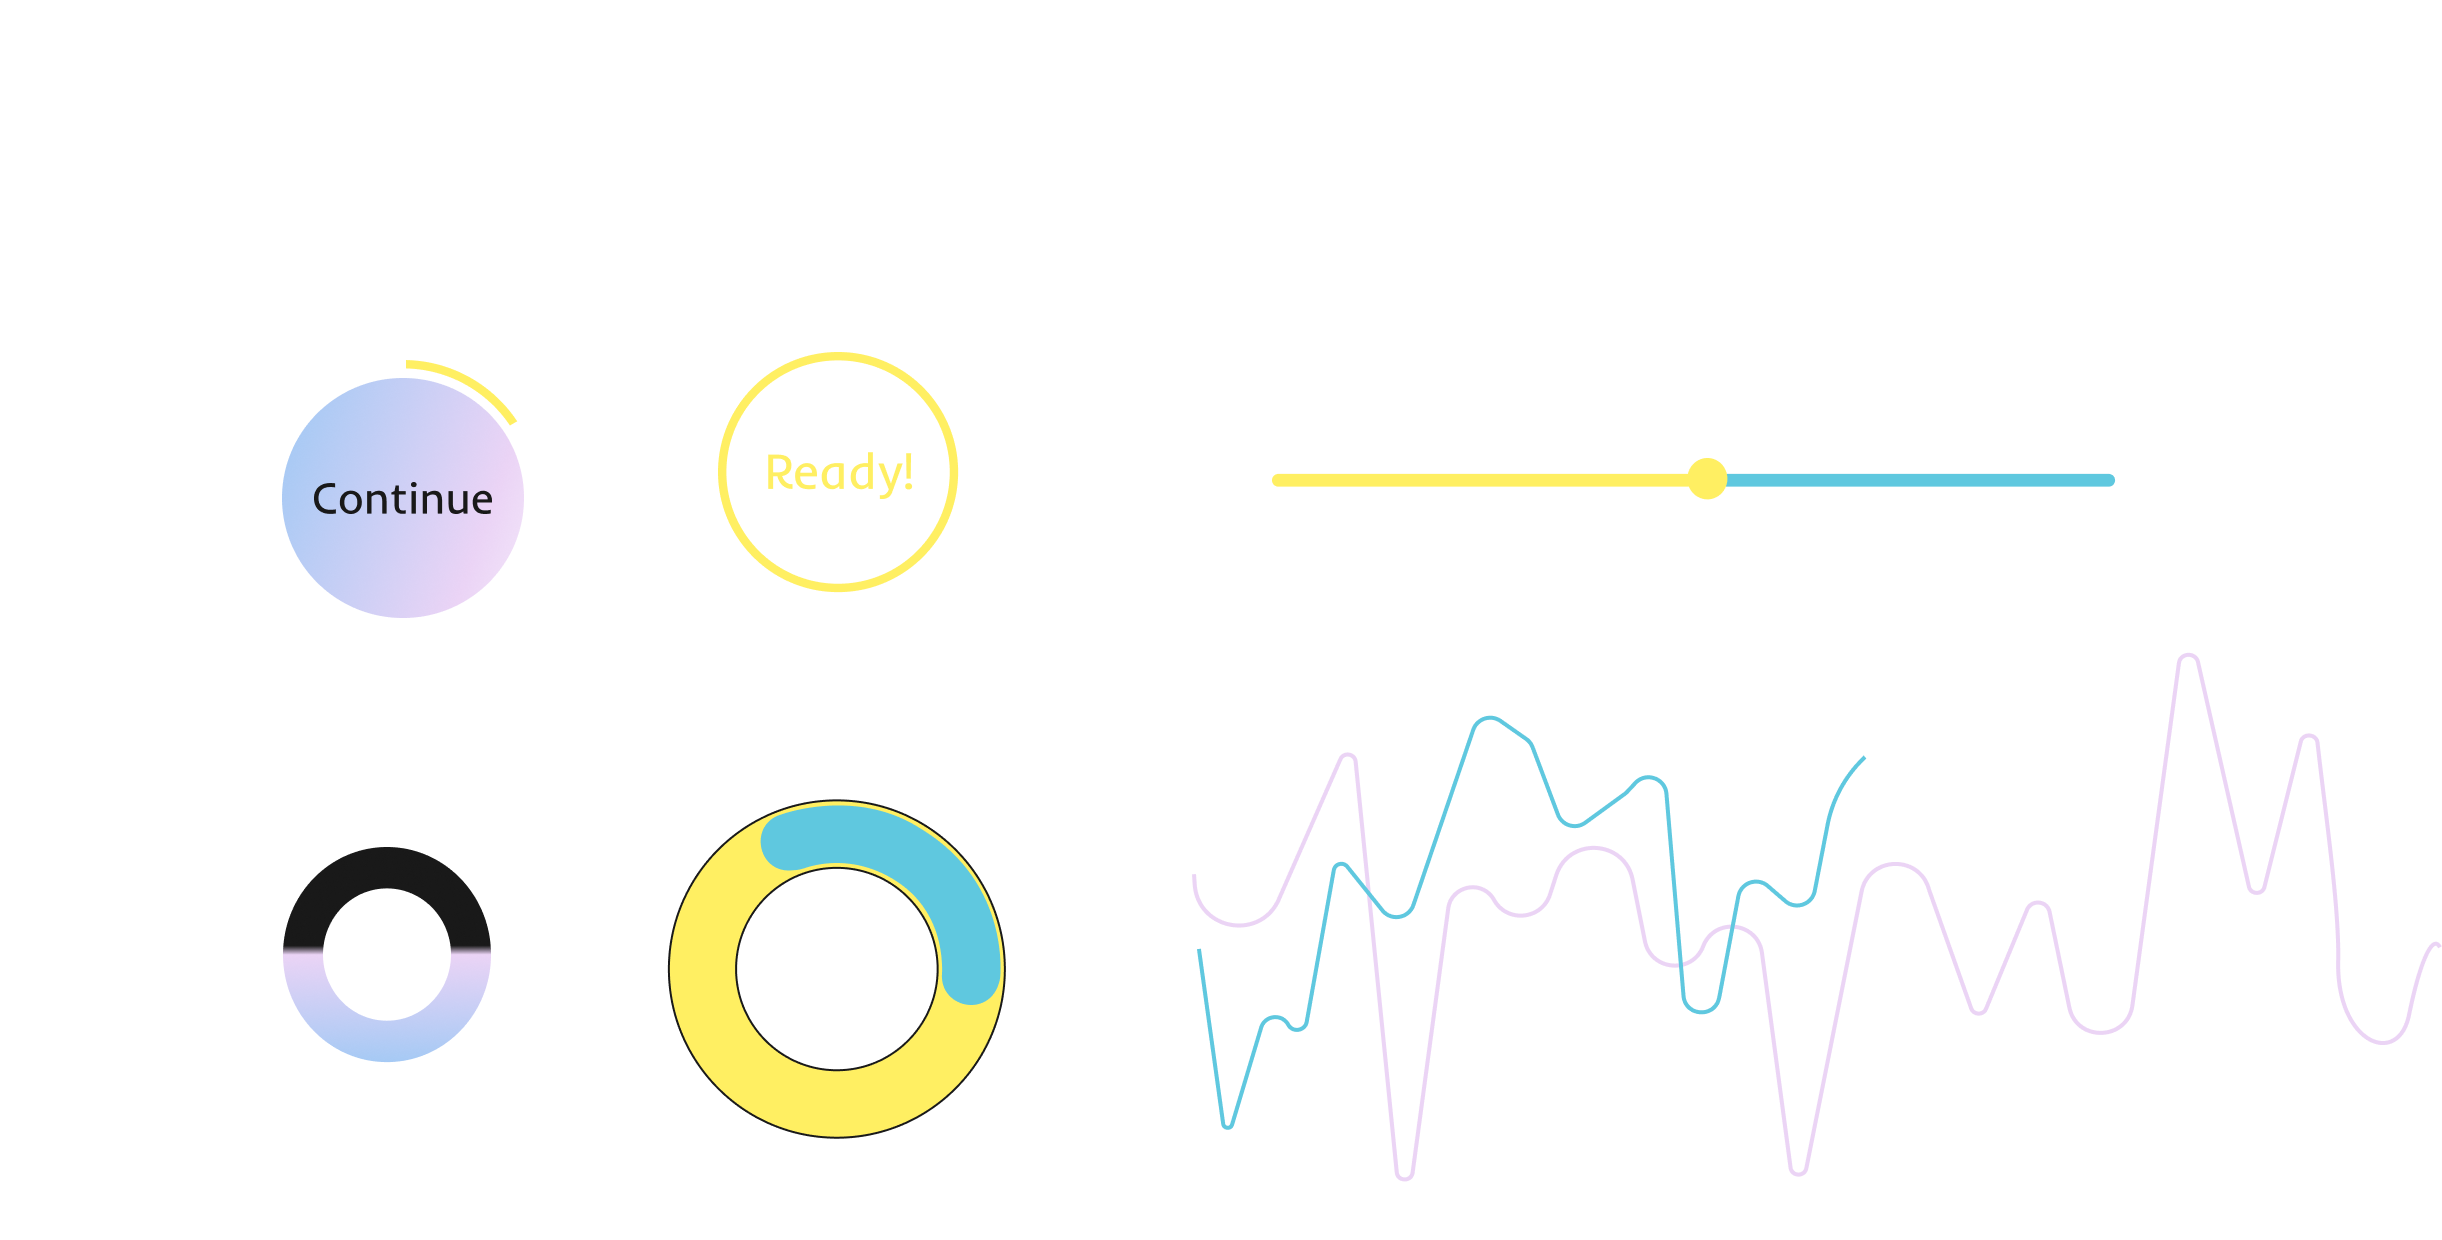 BUTTONS-SLIDERS-GRAPHS